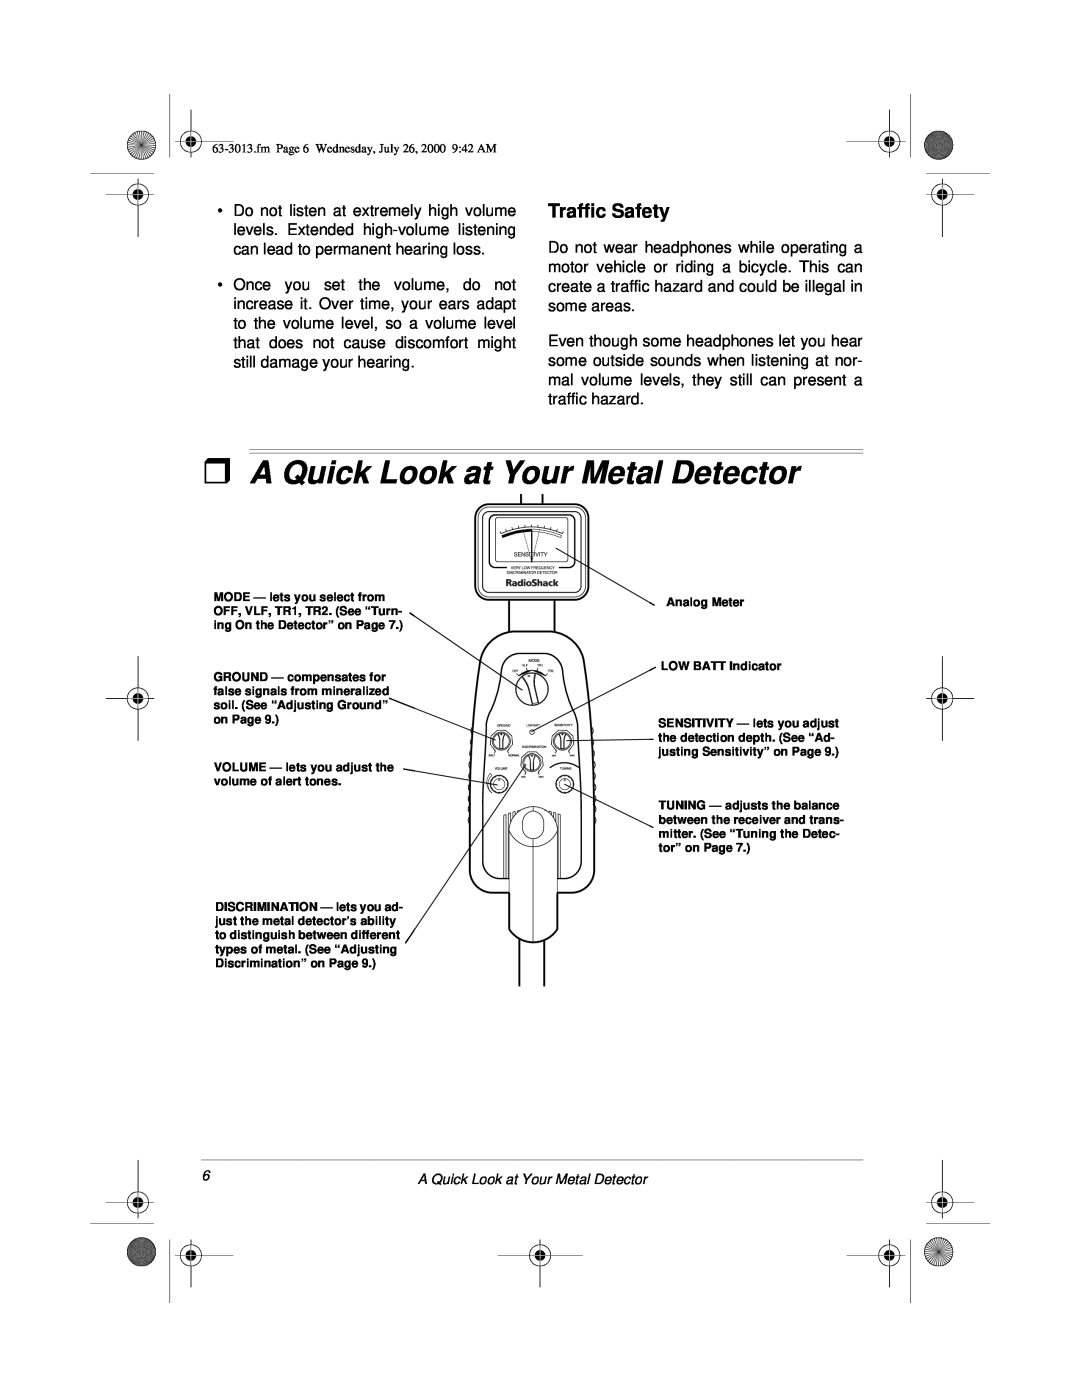 Radio Shack 63-3013 owner manual ˆA Quick Look at Your Metal Detector, Traffic Safety 